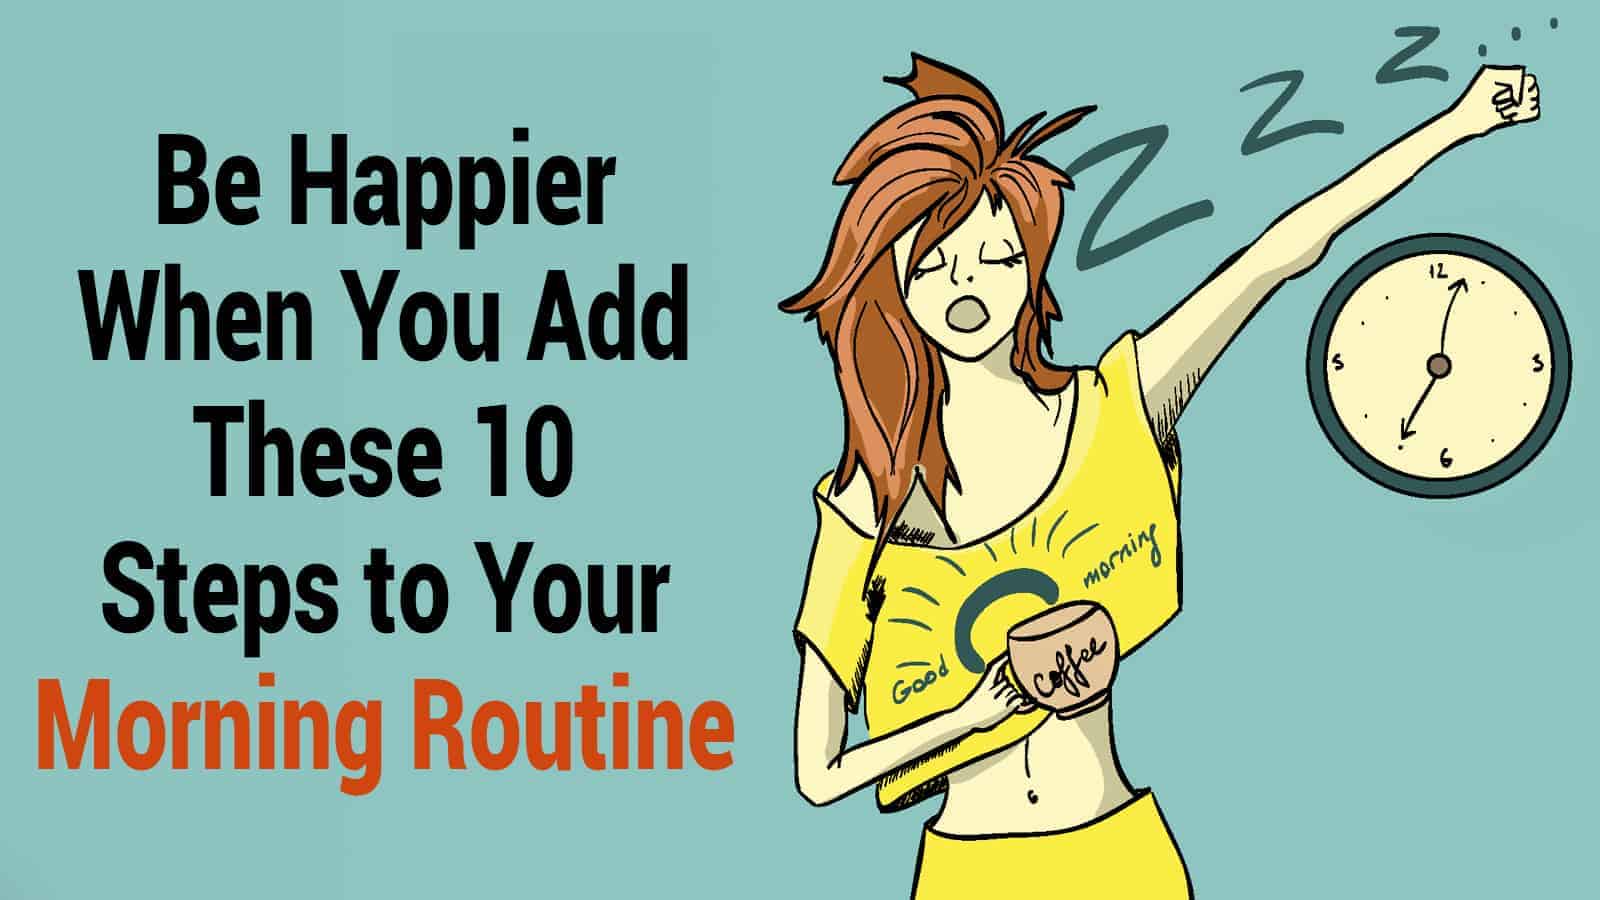 Be Happier When You Add These 10 Steps to Your Morning Routine